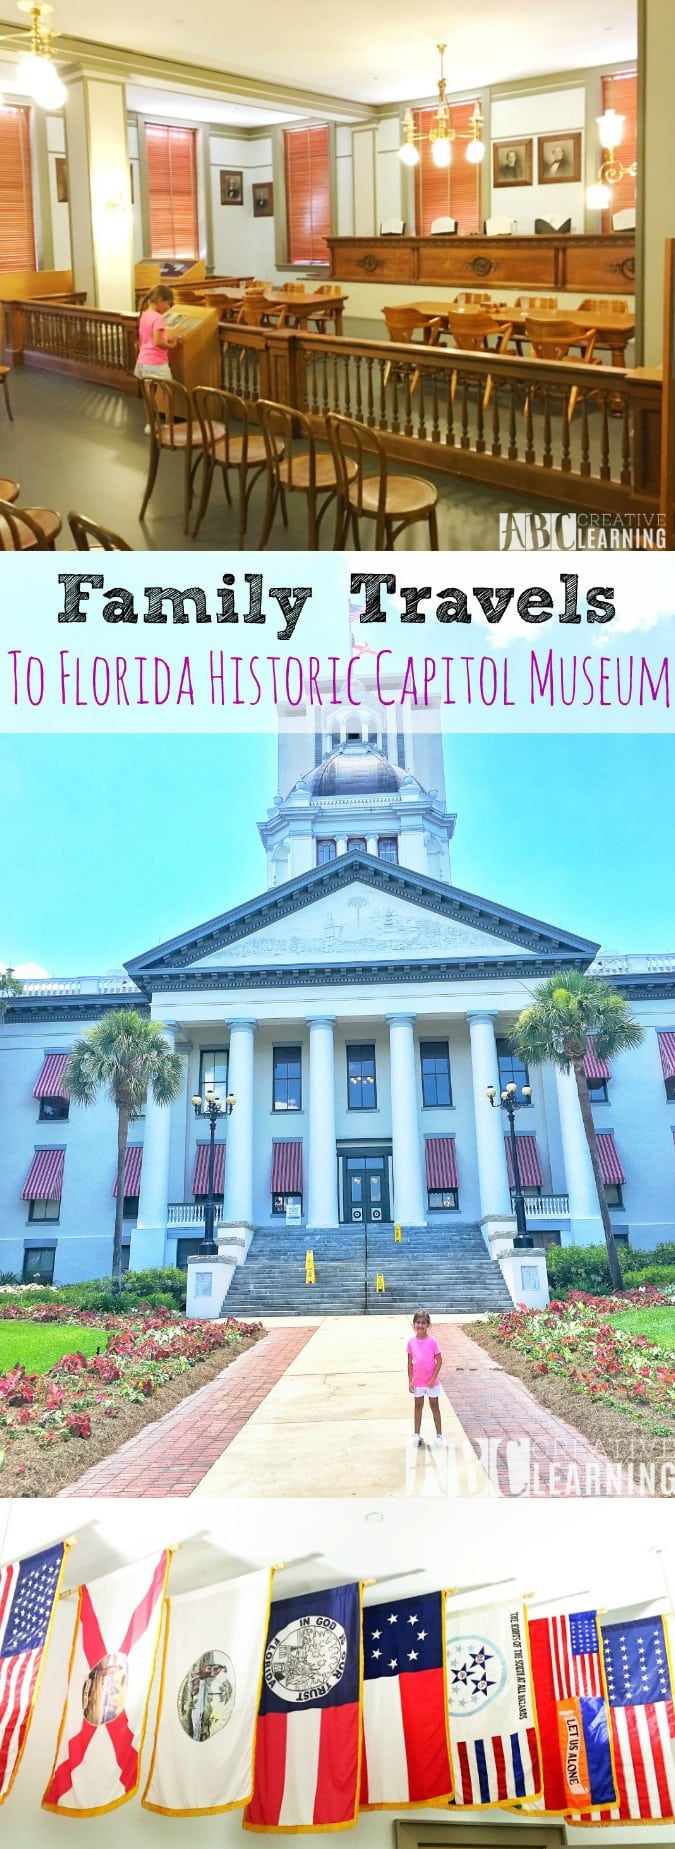 Family Travels to Florida Historic Capitol Museum